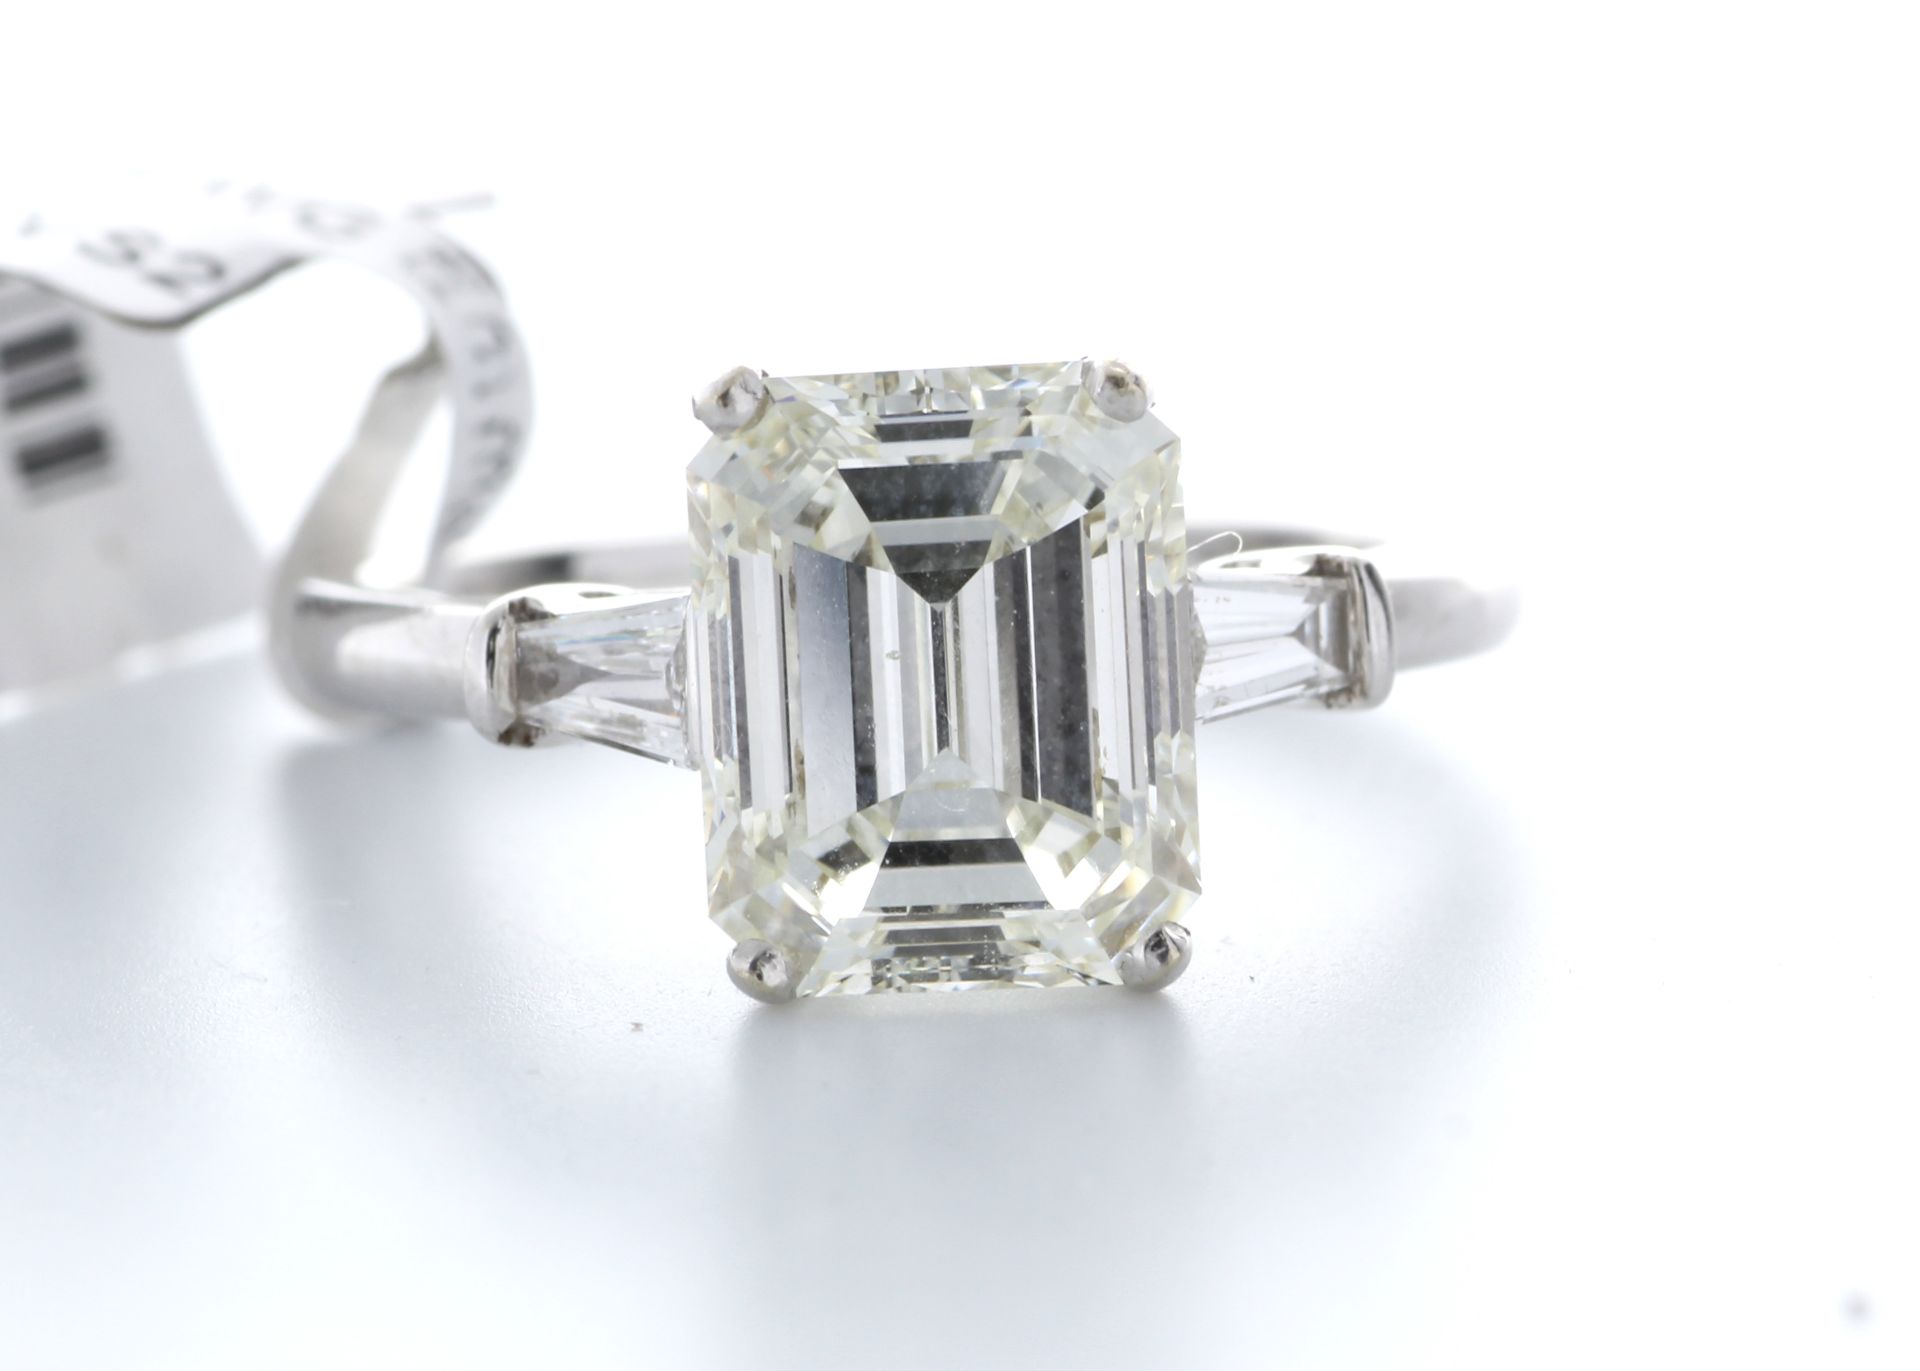 18ct White Gold Single Stone Emerald Cut Diamond Ring With Baguette Shoulders 3.19 - Image 2 of 2